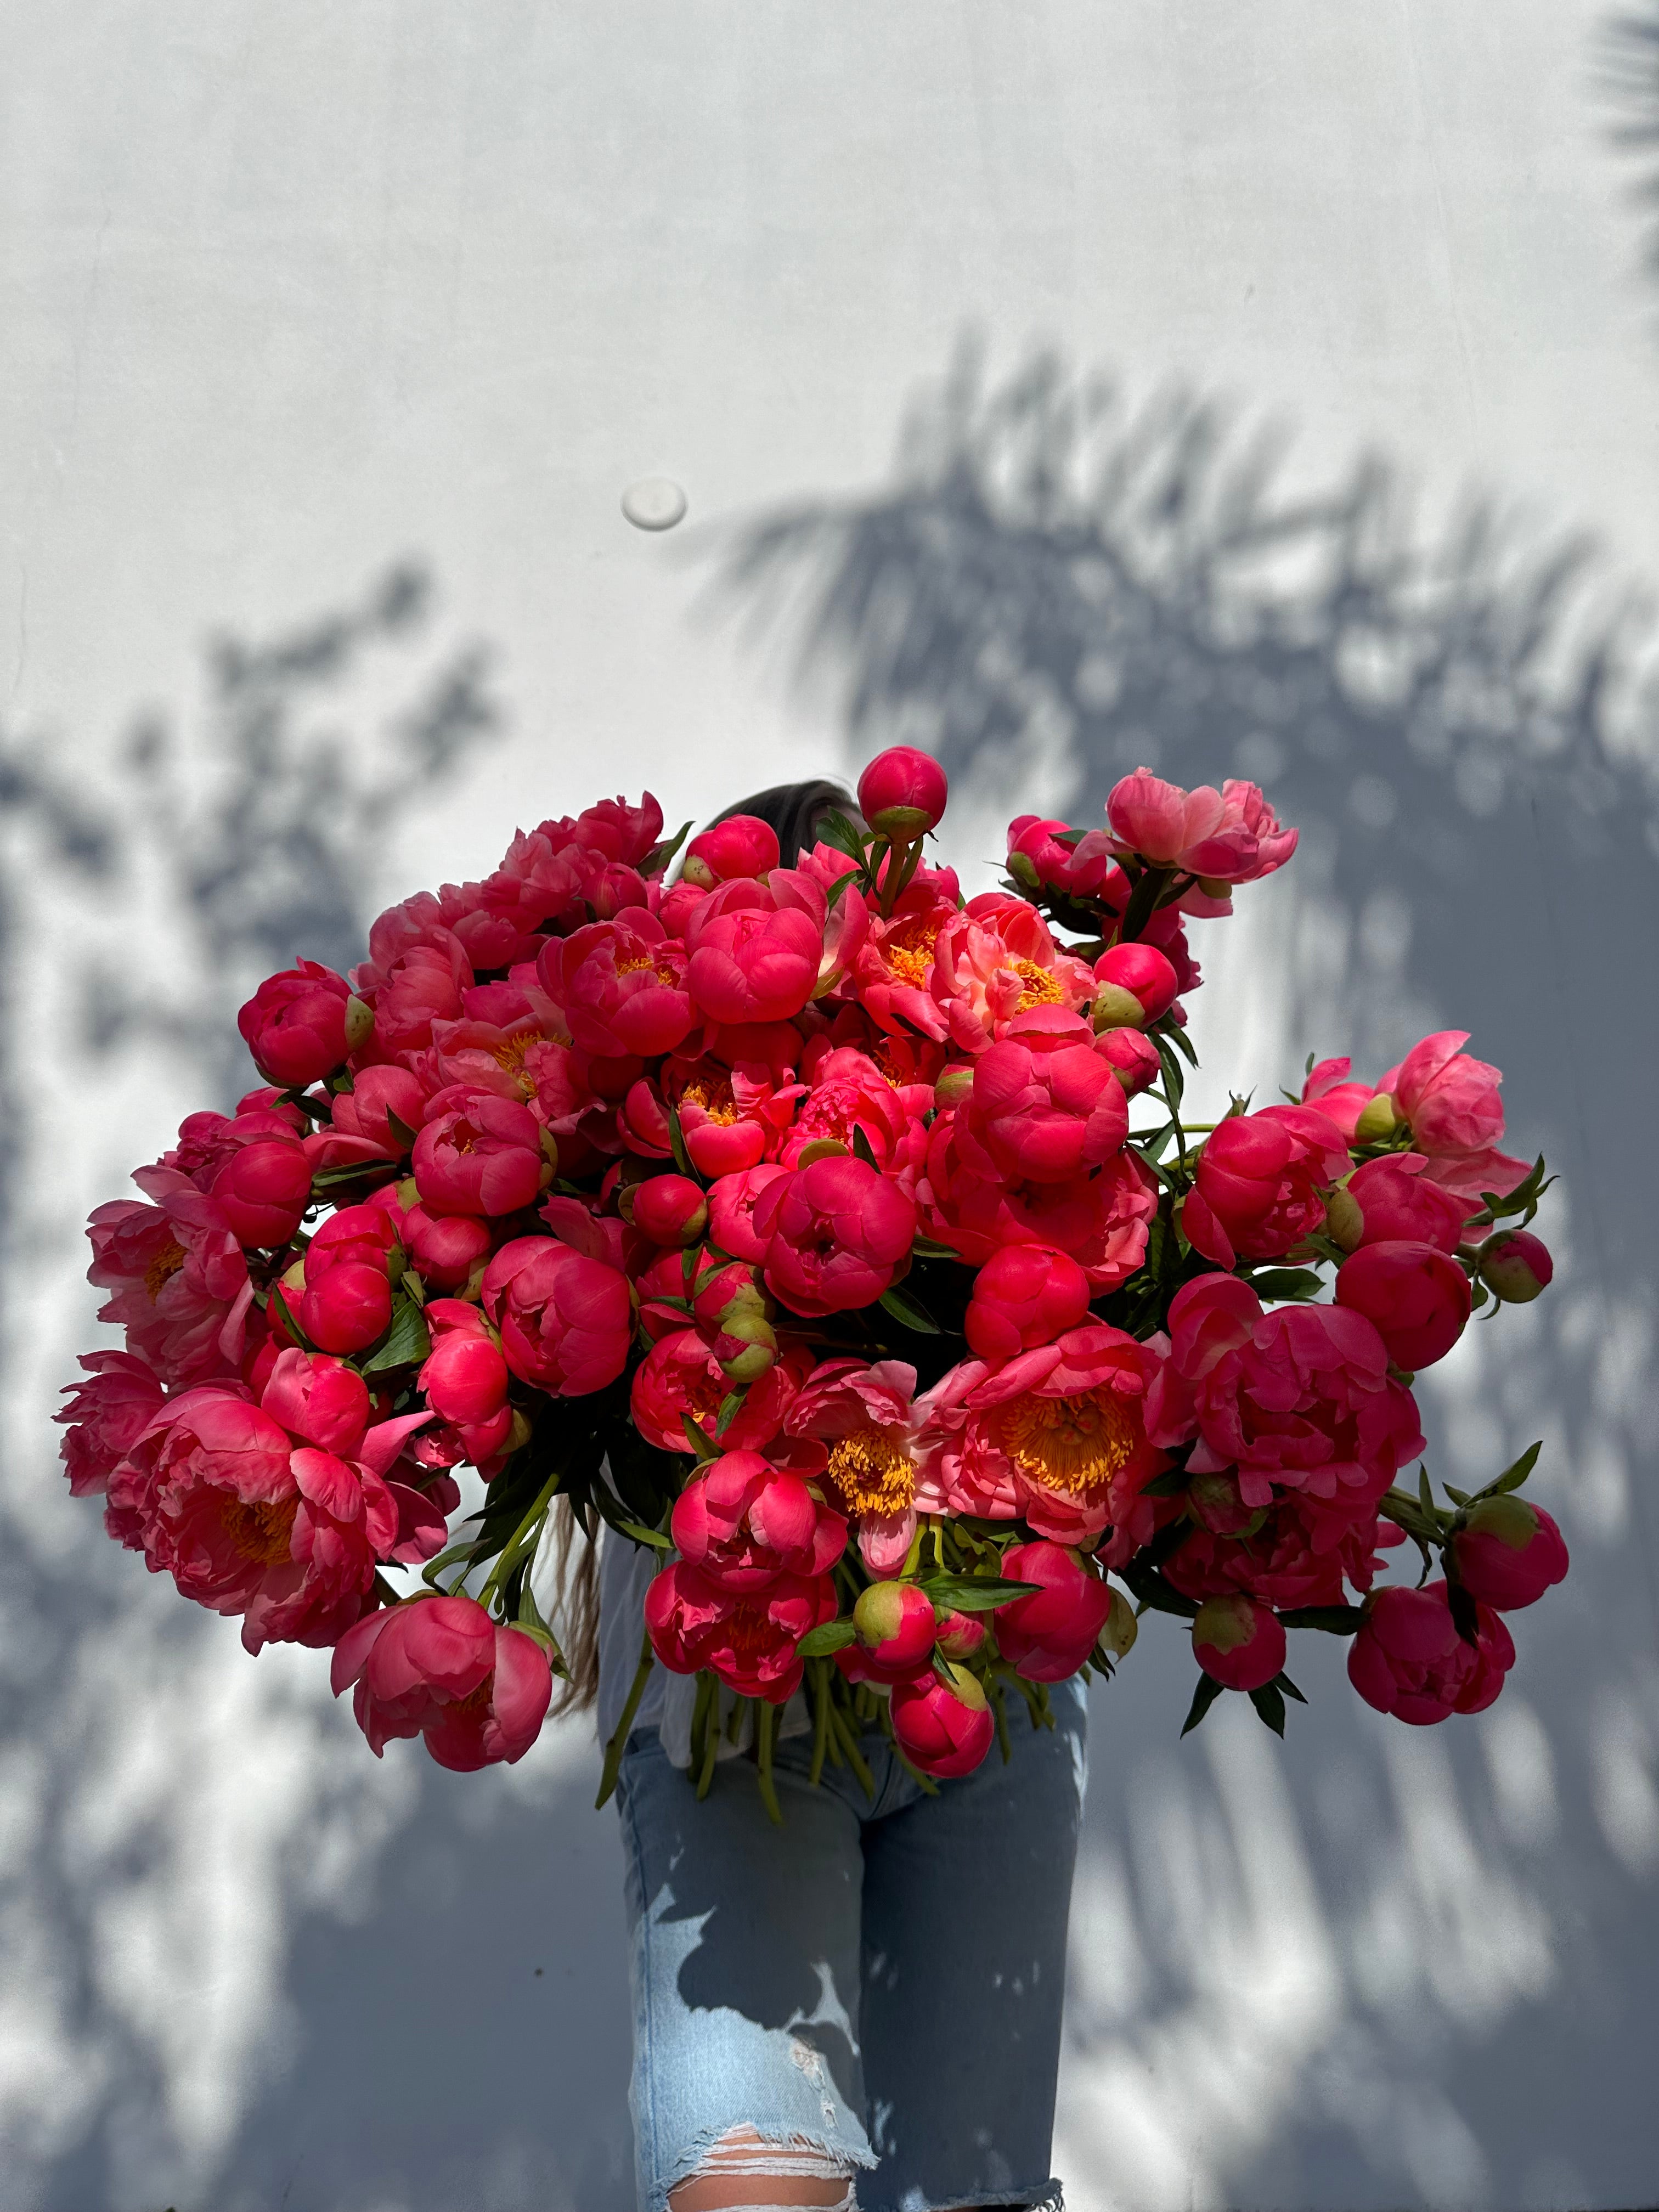 Coral is the new pink - 120 coral peonies